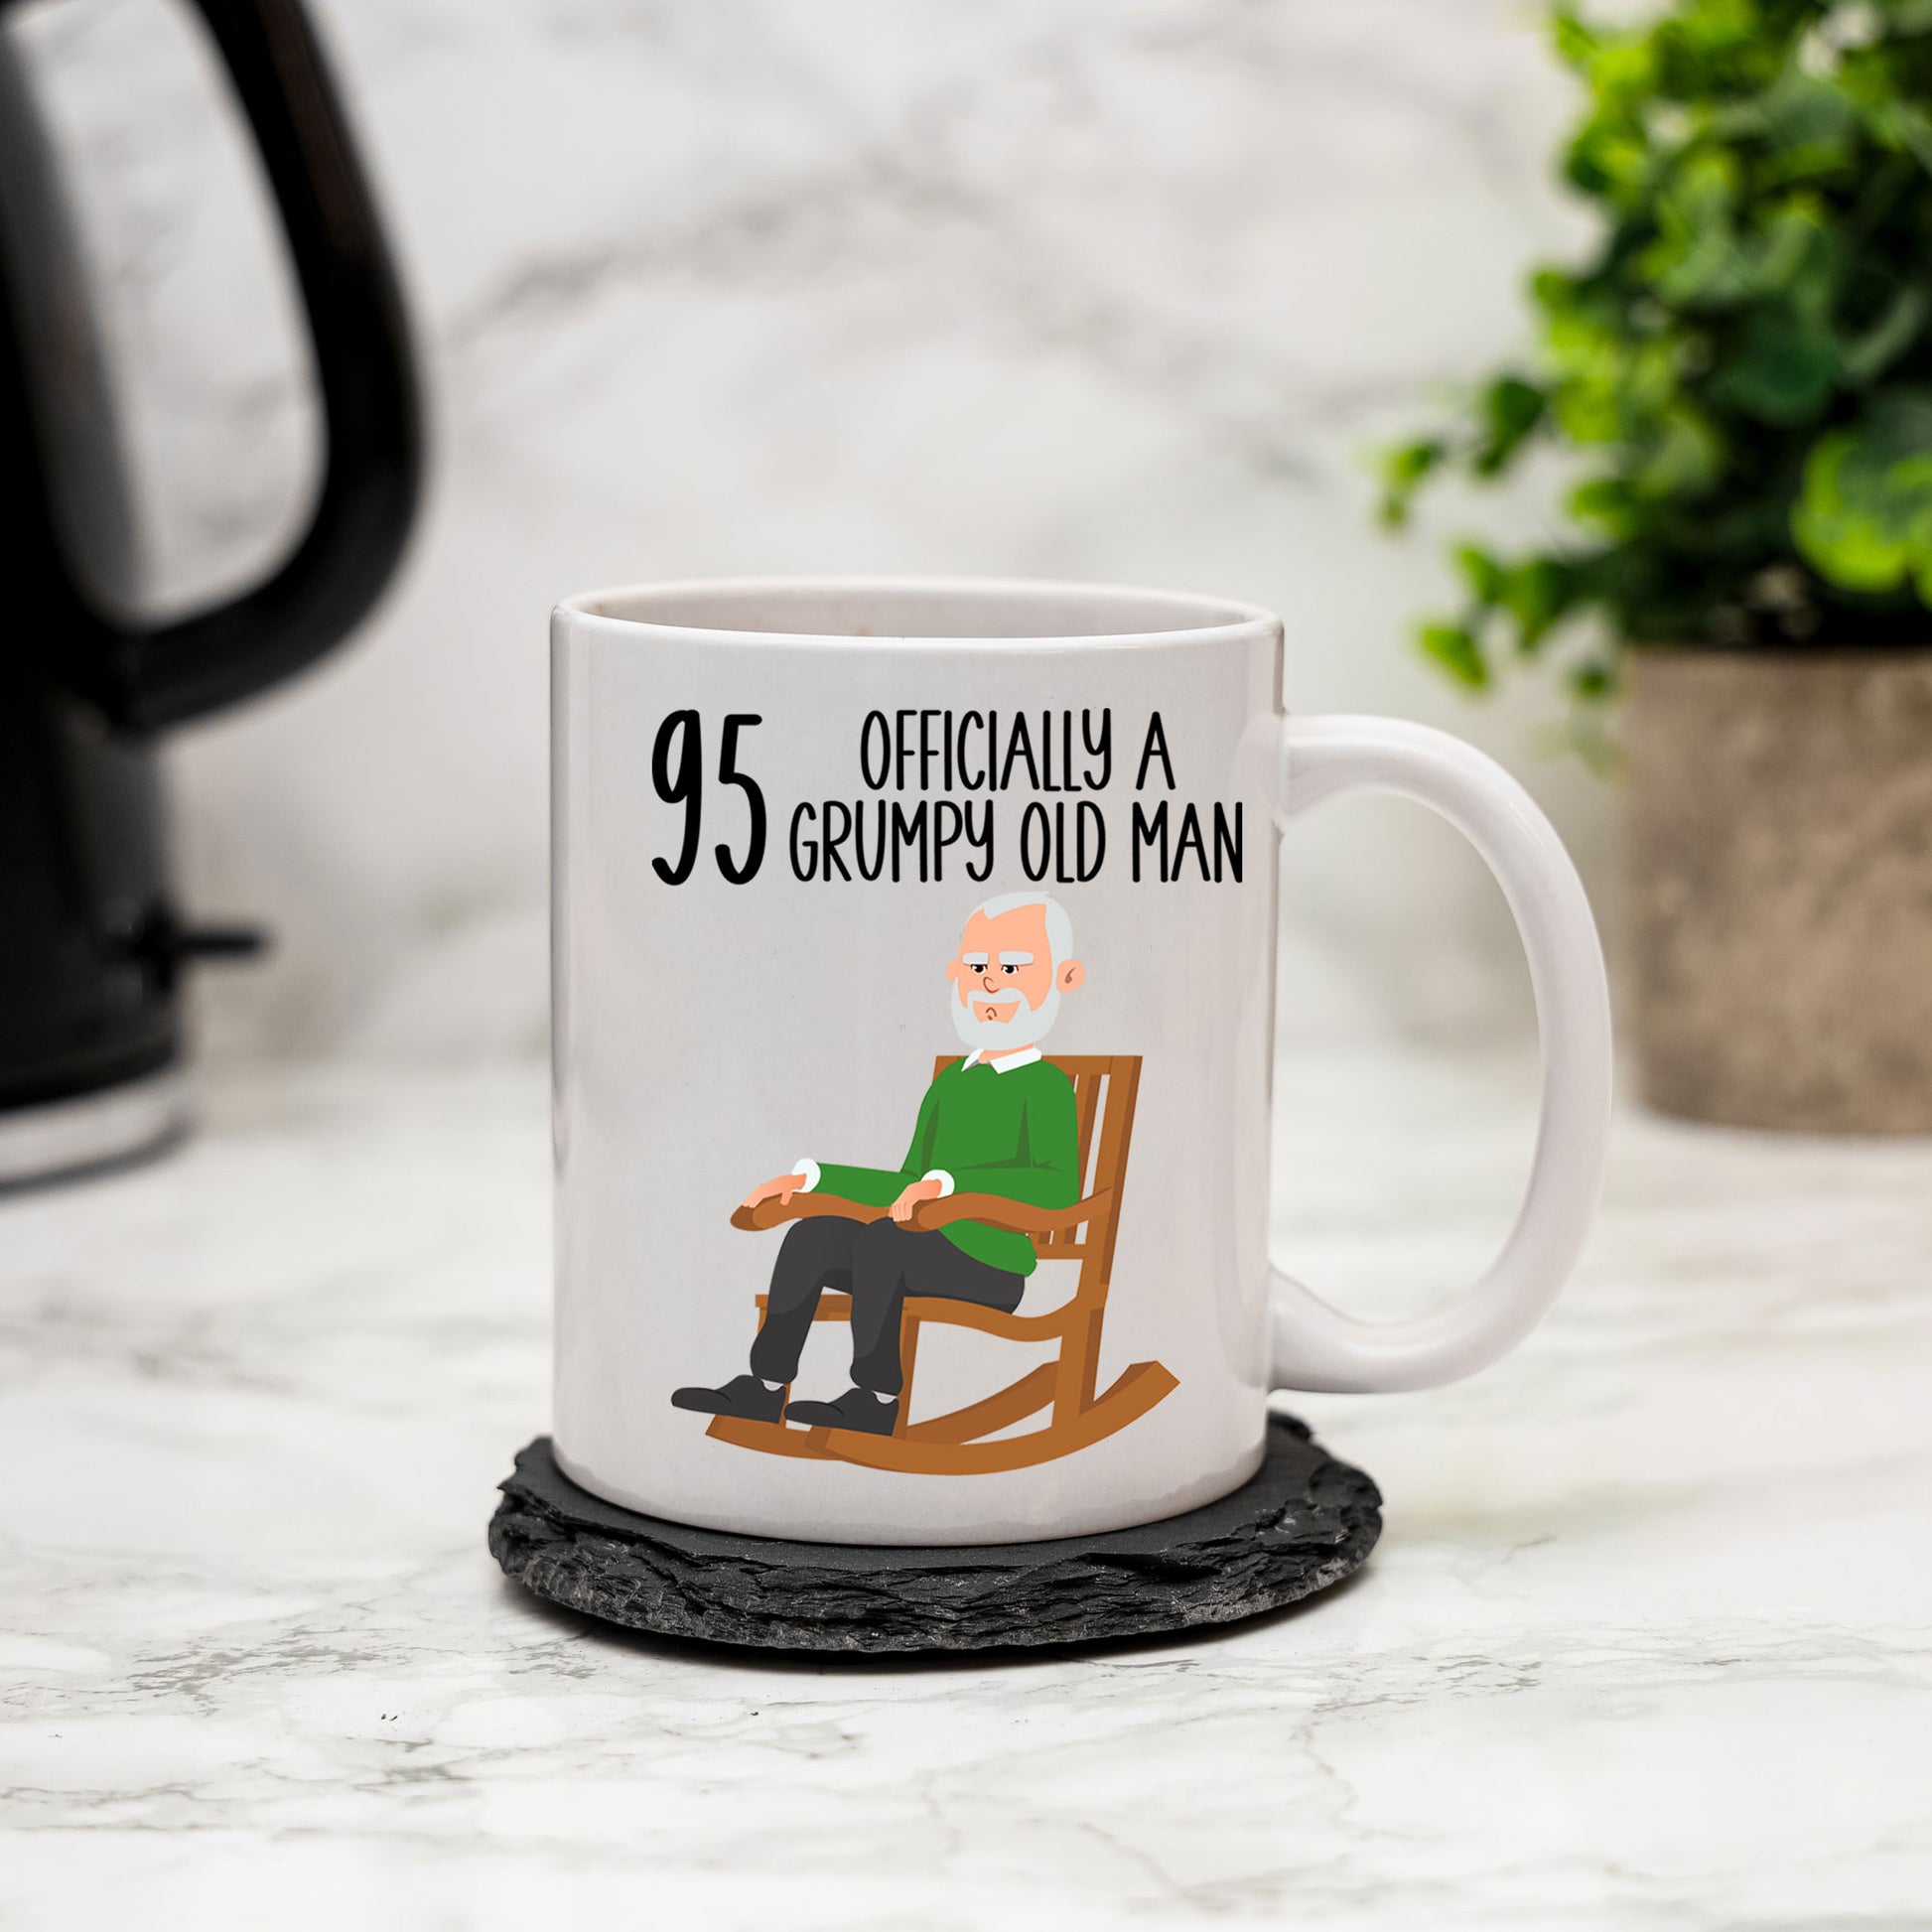 95th Officially A Grumpy Old Man Mug and/or Coaster Gift  - Always Looking Good -   